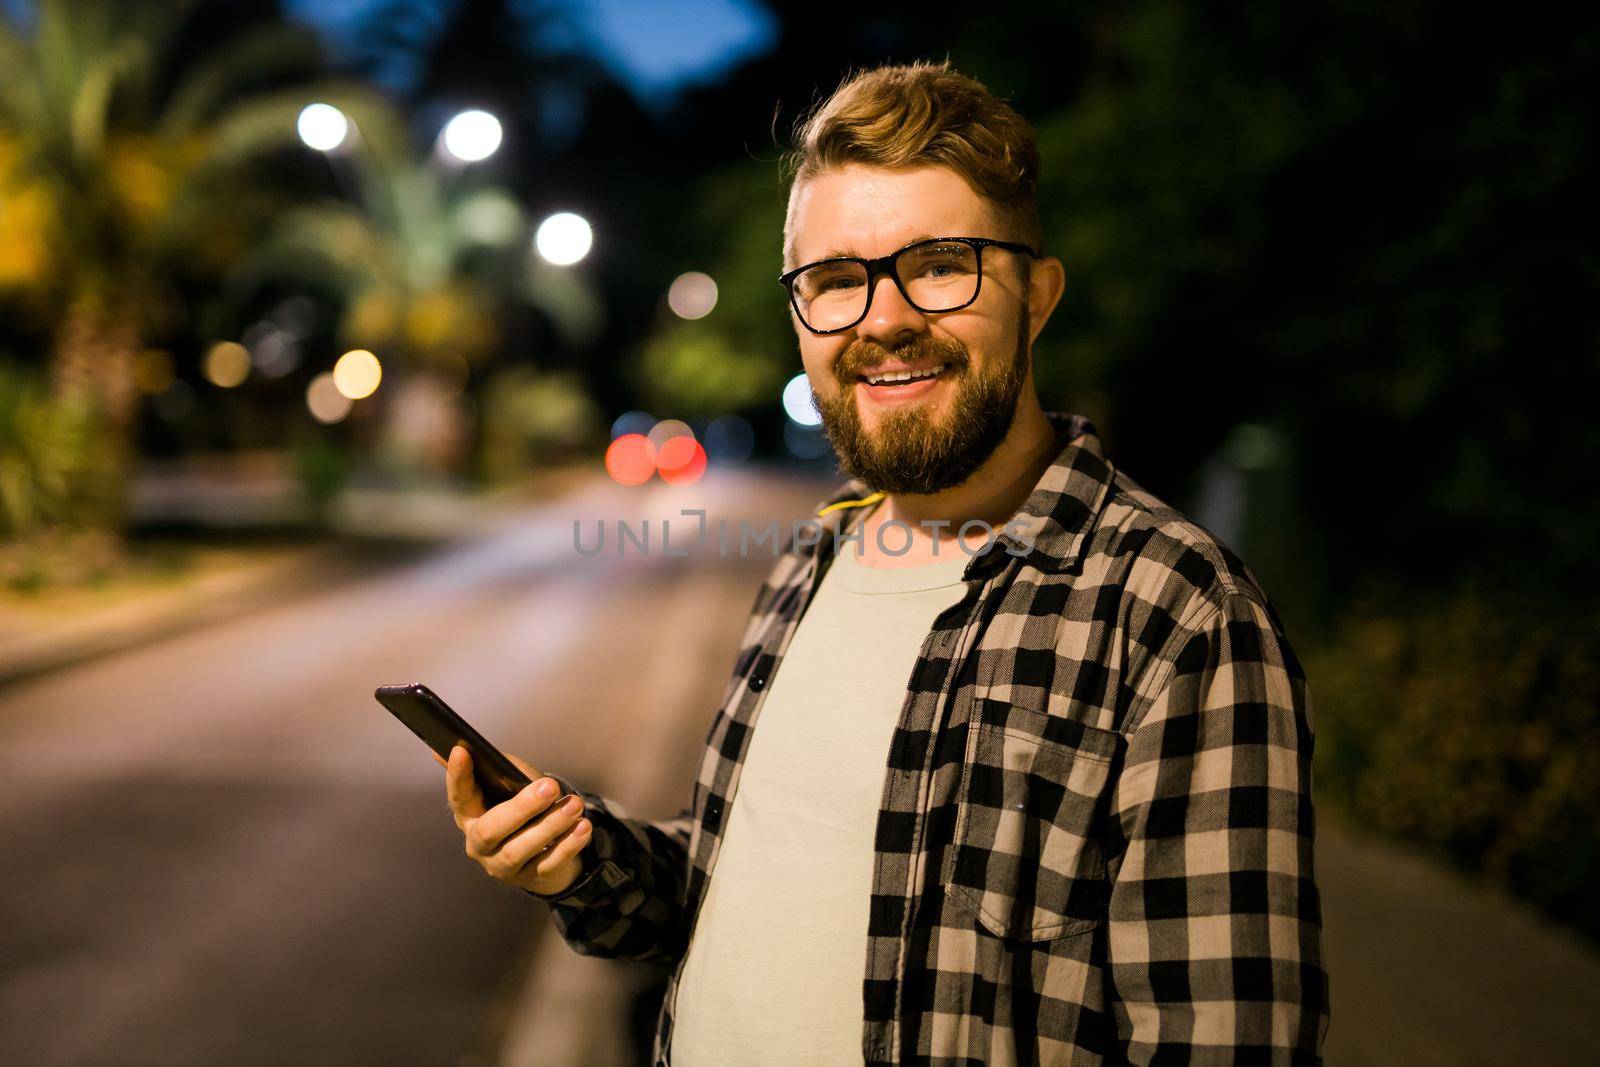 Man waits taxi by using transportation app on night street. Technologies and city